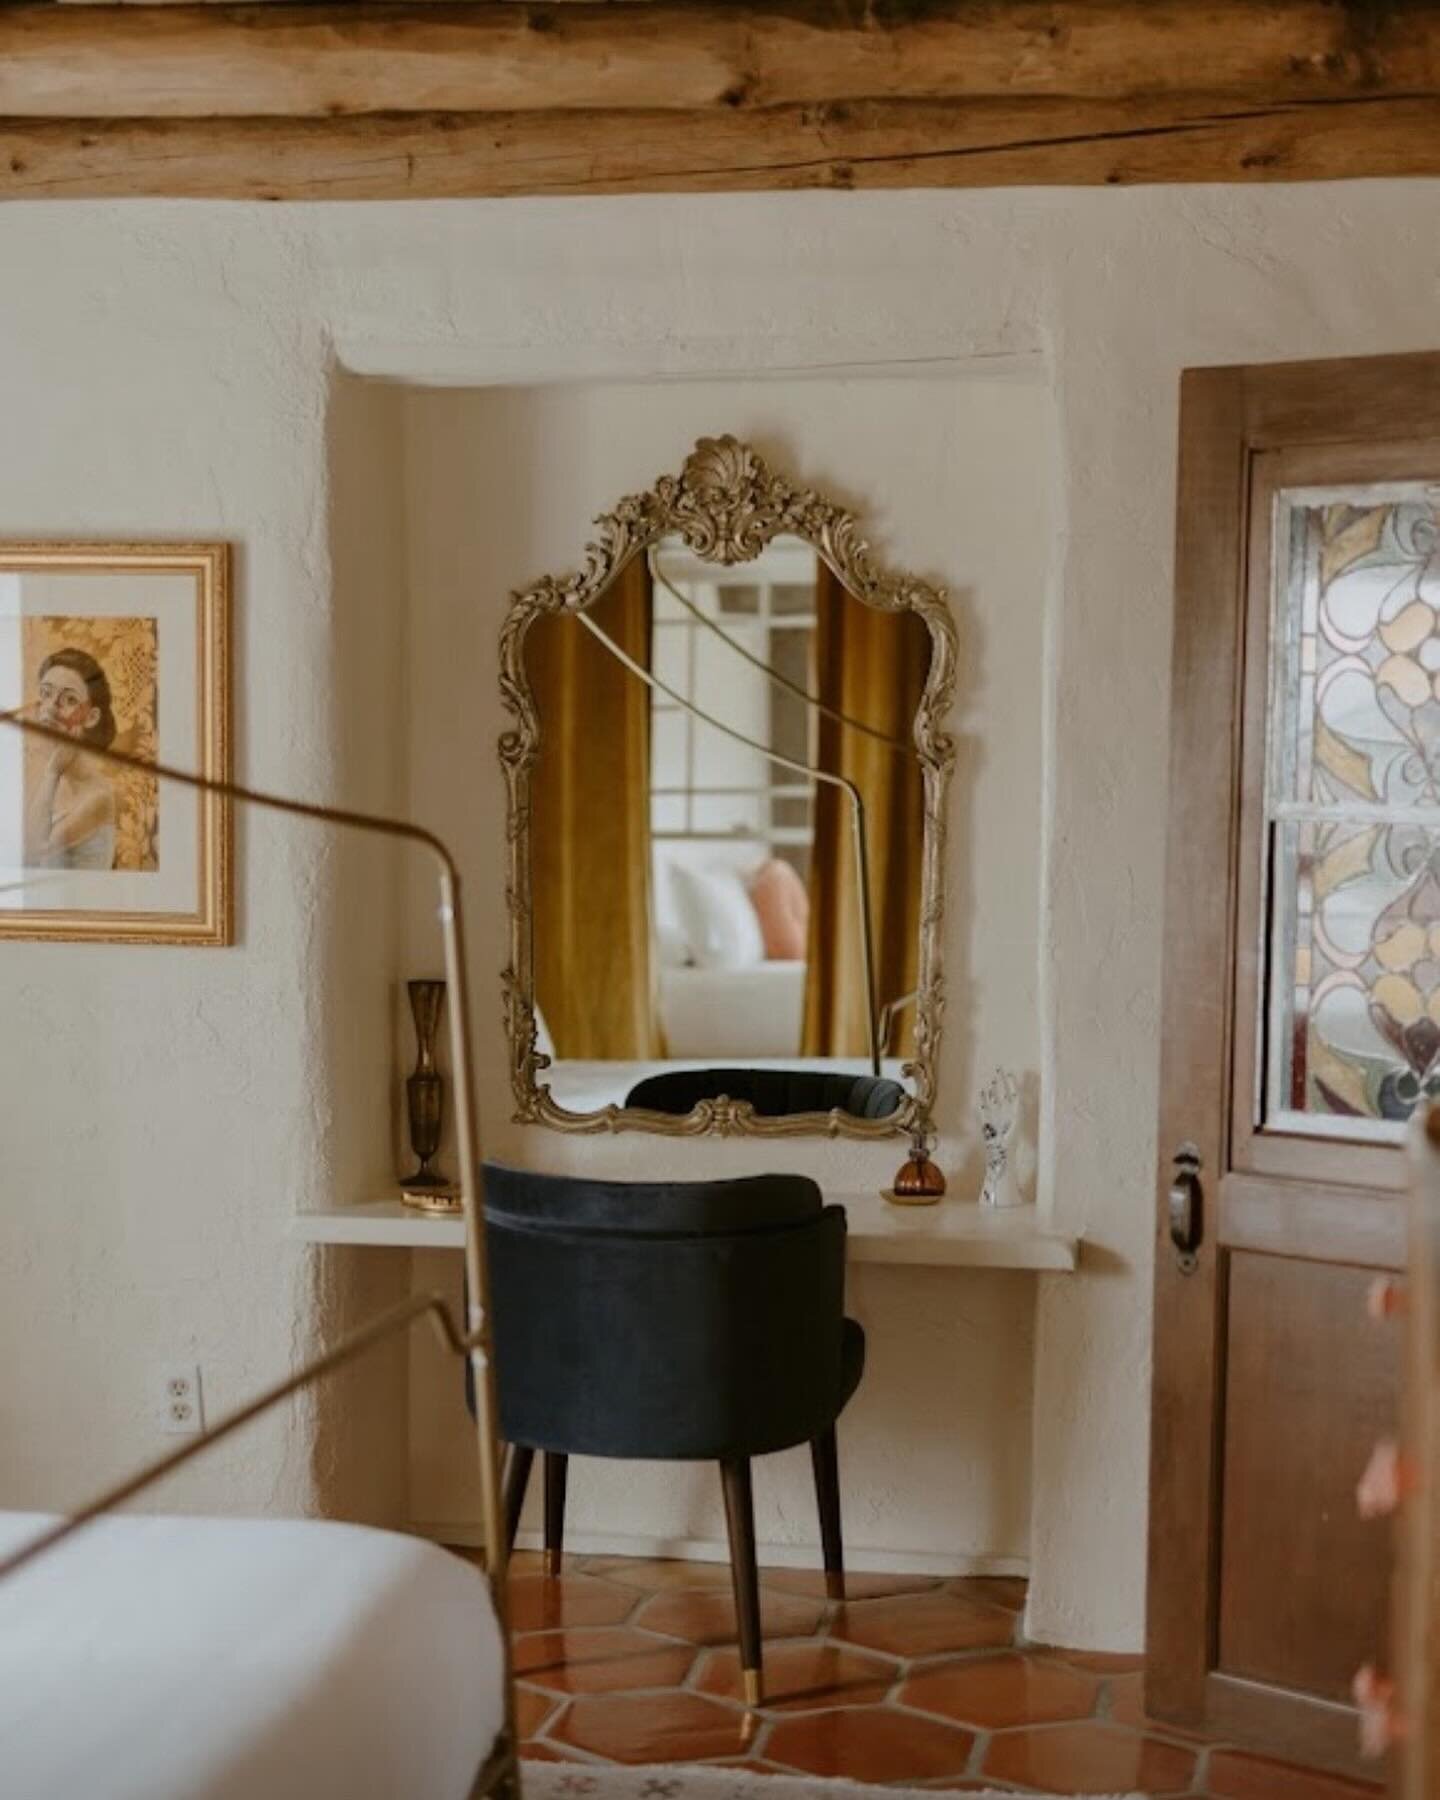 From gold mirrors to stained glass doors to the art of @doriellecaimi and @c.schwathe - there&rsquo;s romantic charm around every corner in the Luna Suite. 

📸 @kaymariemaes